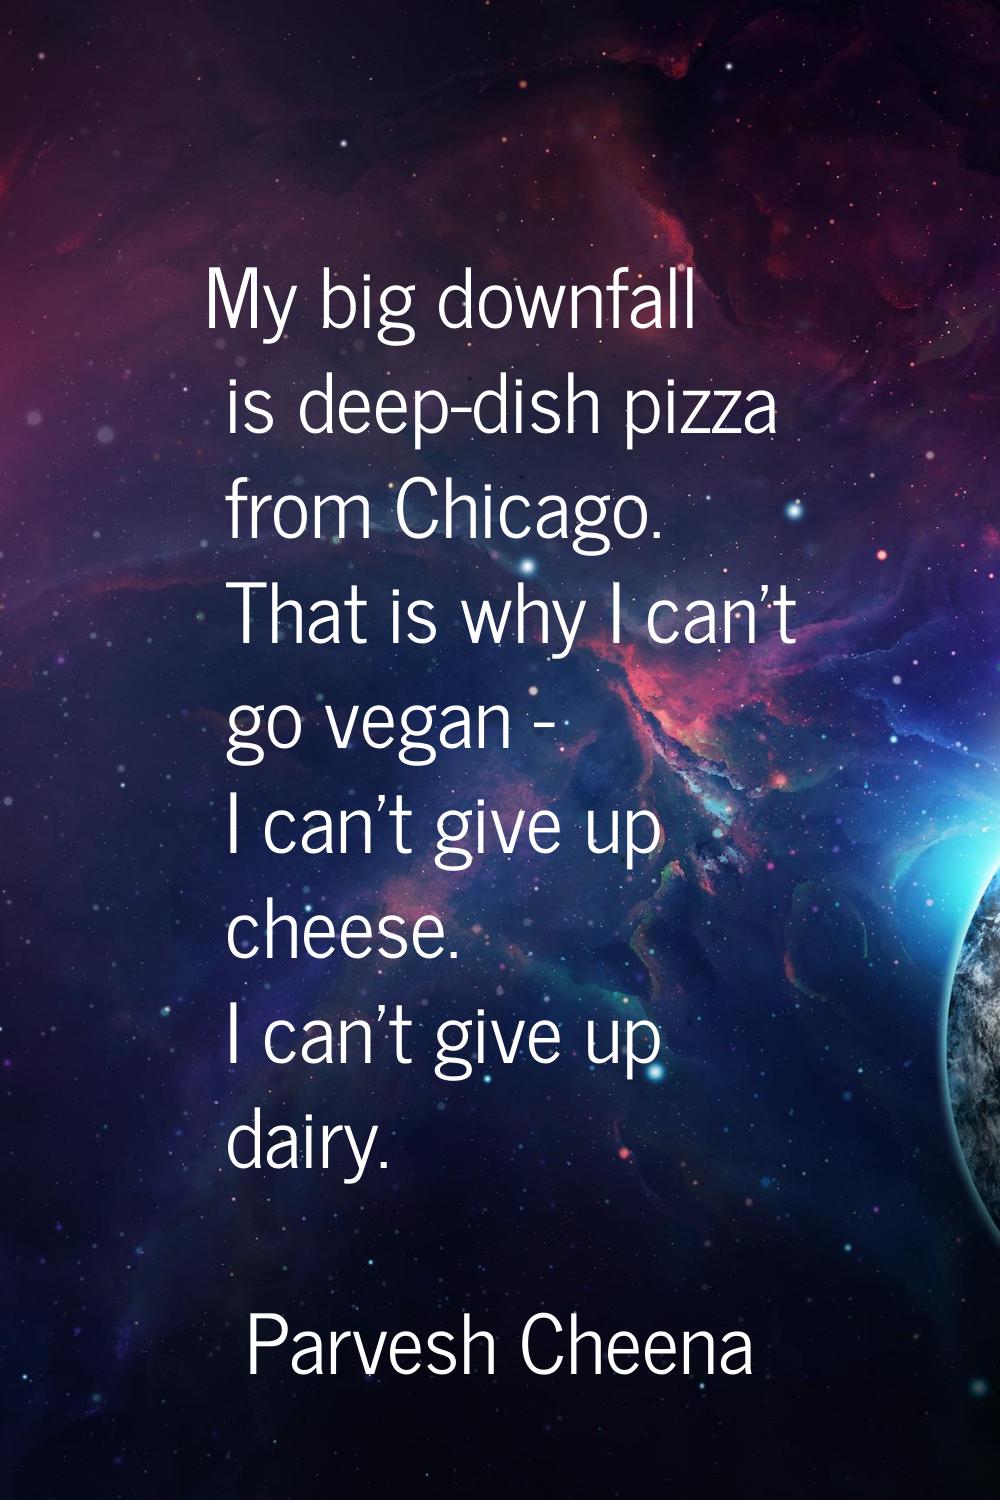 My big downfall is deep-dish pizza from Chicago. That is why I can't go vegan - I can't give up che